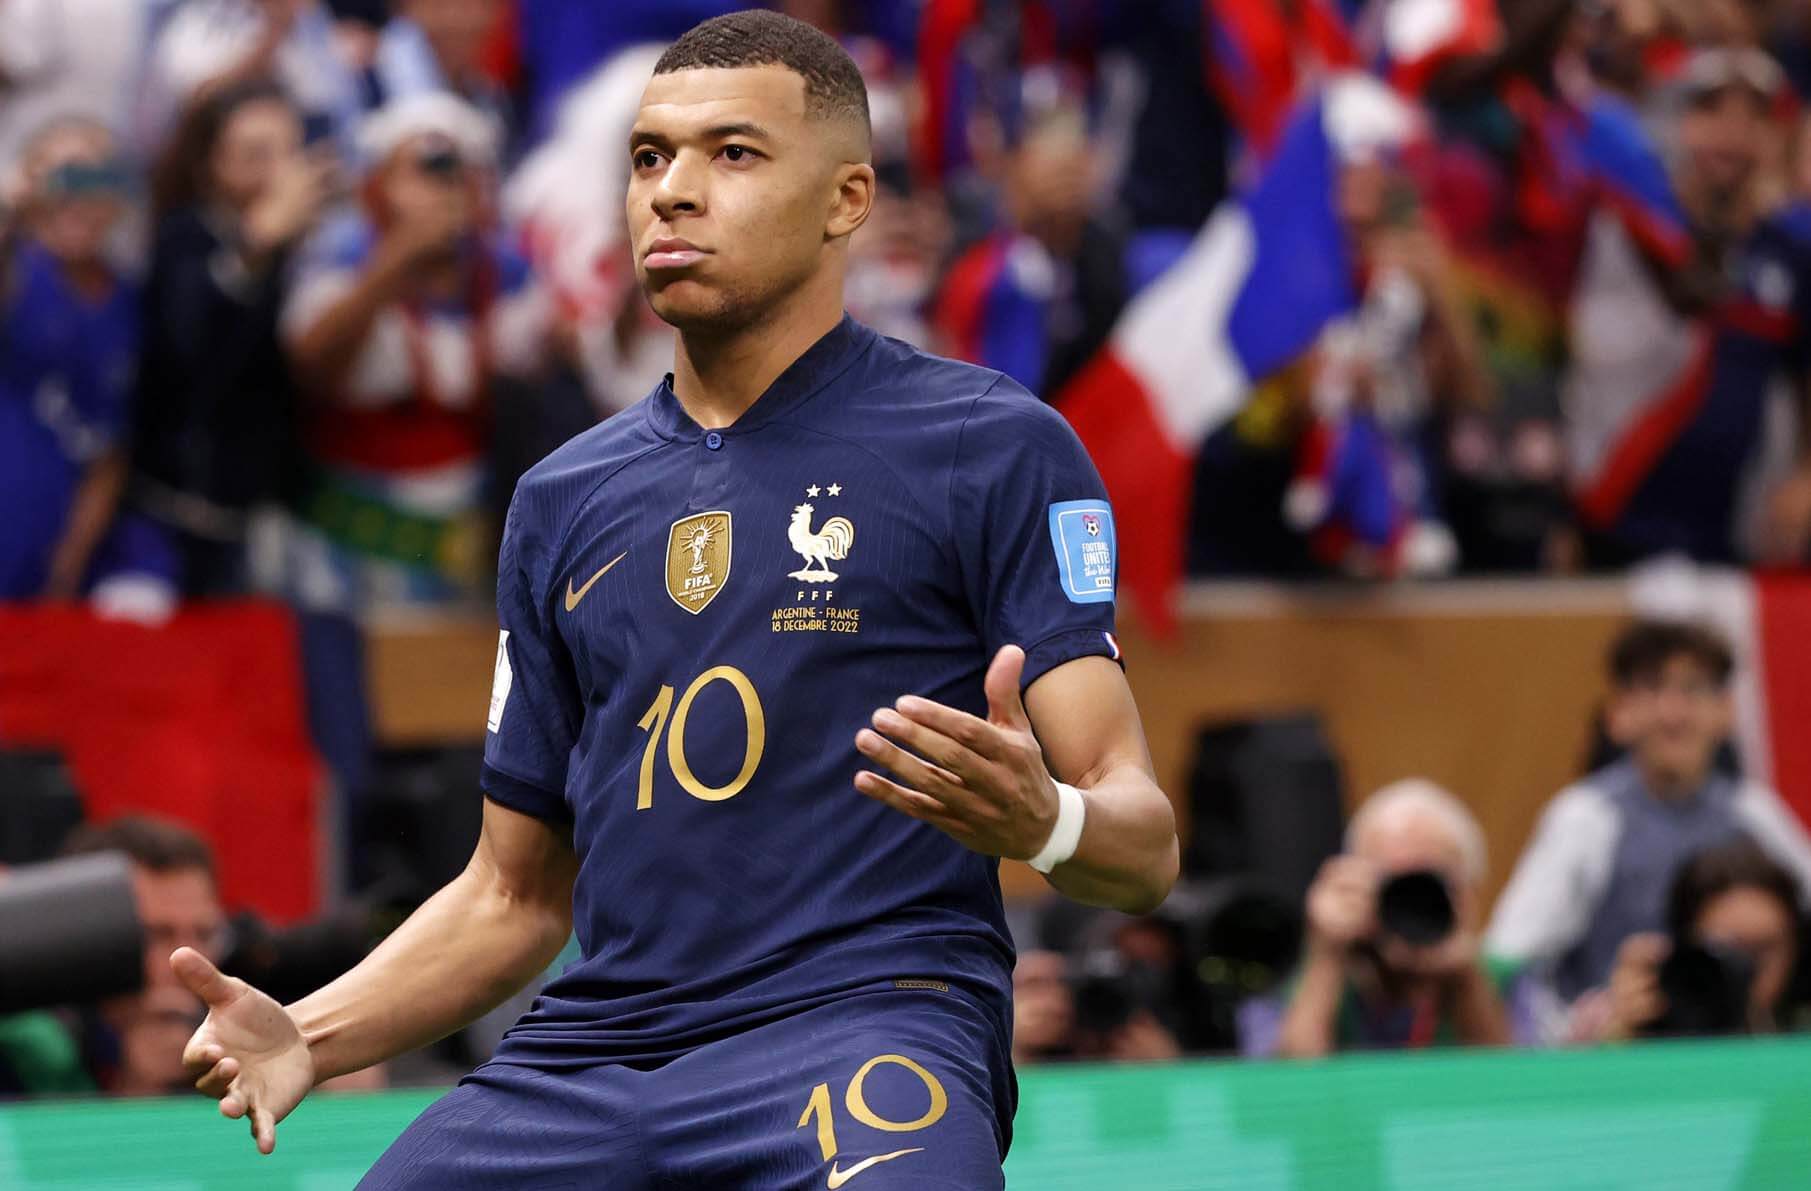 France forward Kylian Mbappe (10) celebrates after scoring a goal against Argentina on a penalty kick for his third goal of the match during extra time of the 2022 World Cup final at Lusail Stadium.